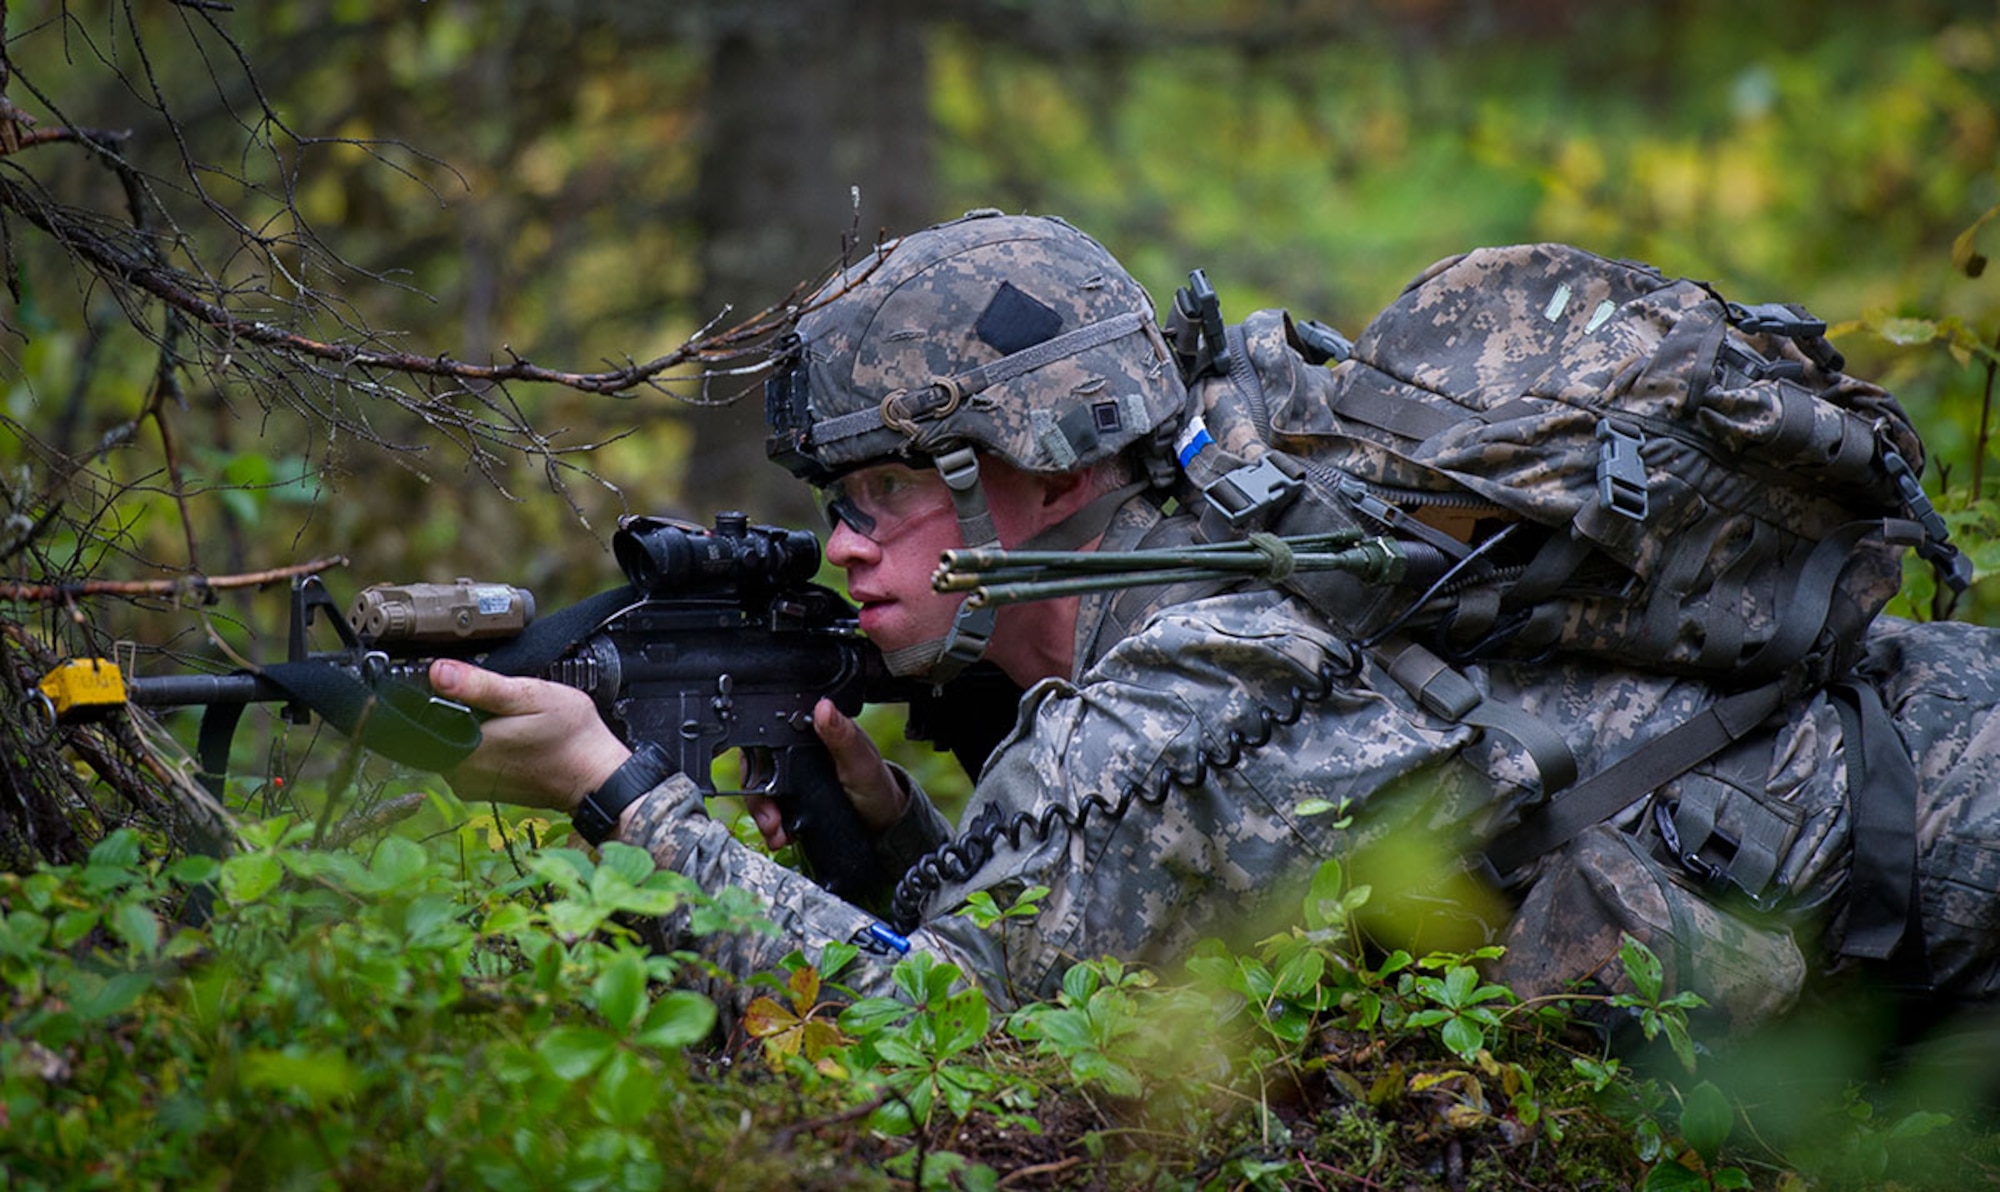 Army Private 1st Class Marcus Deluca, a native of Franklin Mass., assigned to the 1st Battalion (Airborne), 501st Infantry Regiment, 4th Infantry Brigade Combat Team (Airborne), 25th Infantry Division, U.S. Army Alaska, takes aim at a sniper on an Expert Infantryman Badge qualification lane on Joint Base Elmendorf-Richardson, Wednesday, Sept. 10, 2014. The Expert Infantryman Badge was approved by the Secretary of War on October 7, 1943, and is currently awarded to U.S. Army personnel who hold infantry or special forces military occupational specialties and successfully pass the rigors of the course. (U.S. Air Force photo/Justin Connaher)